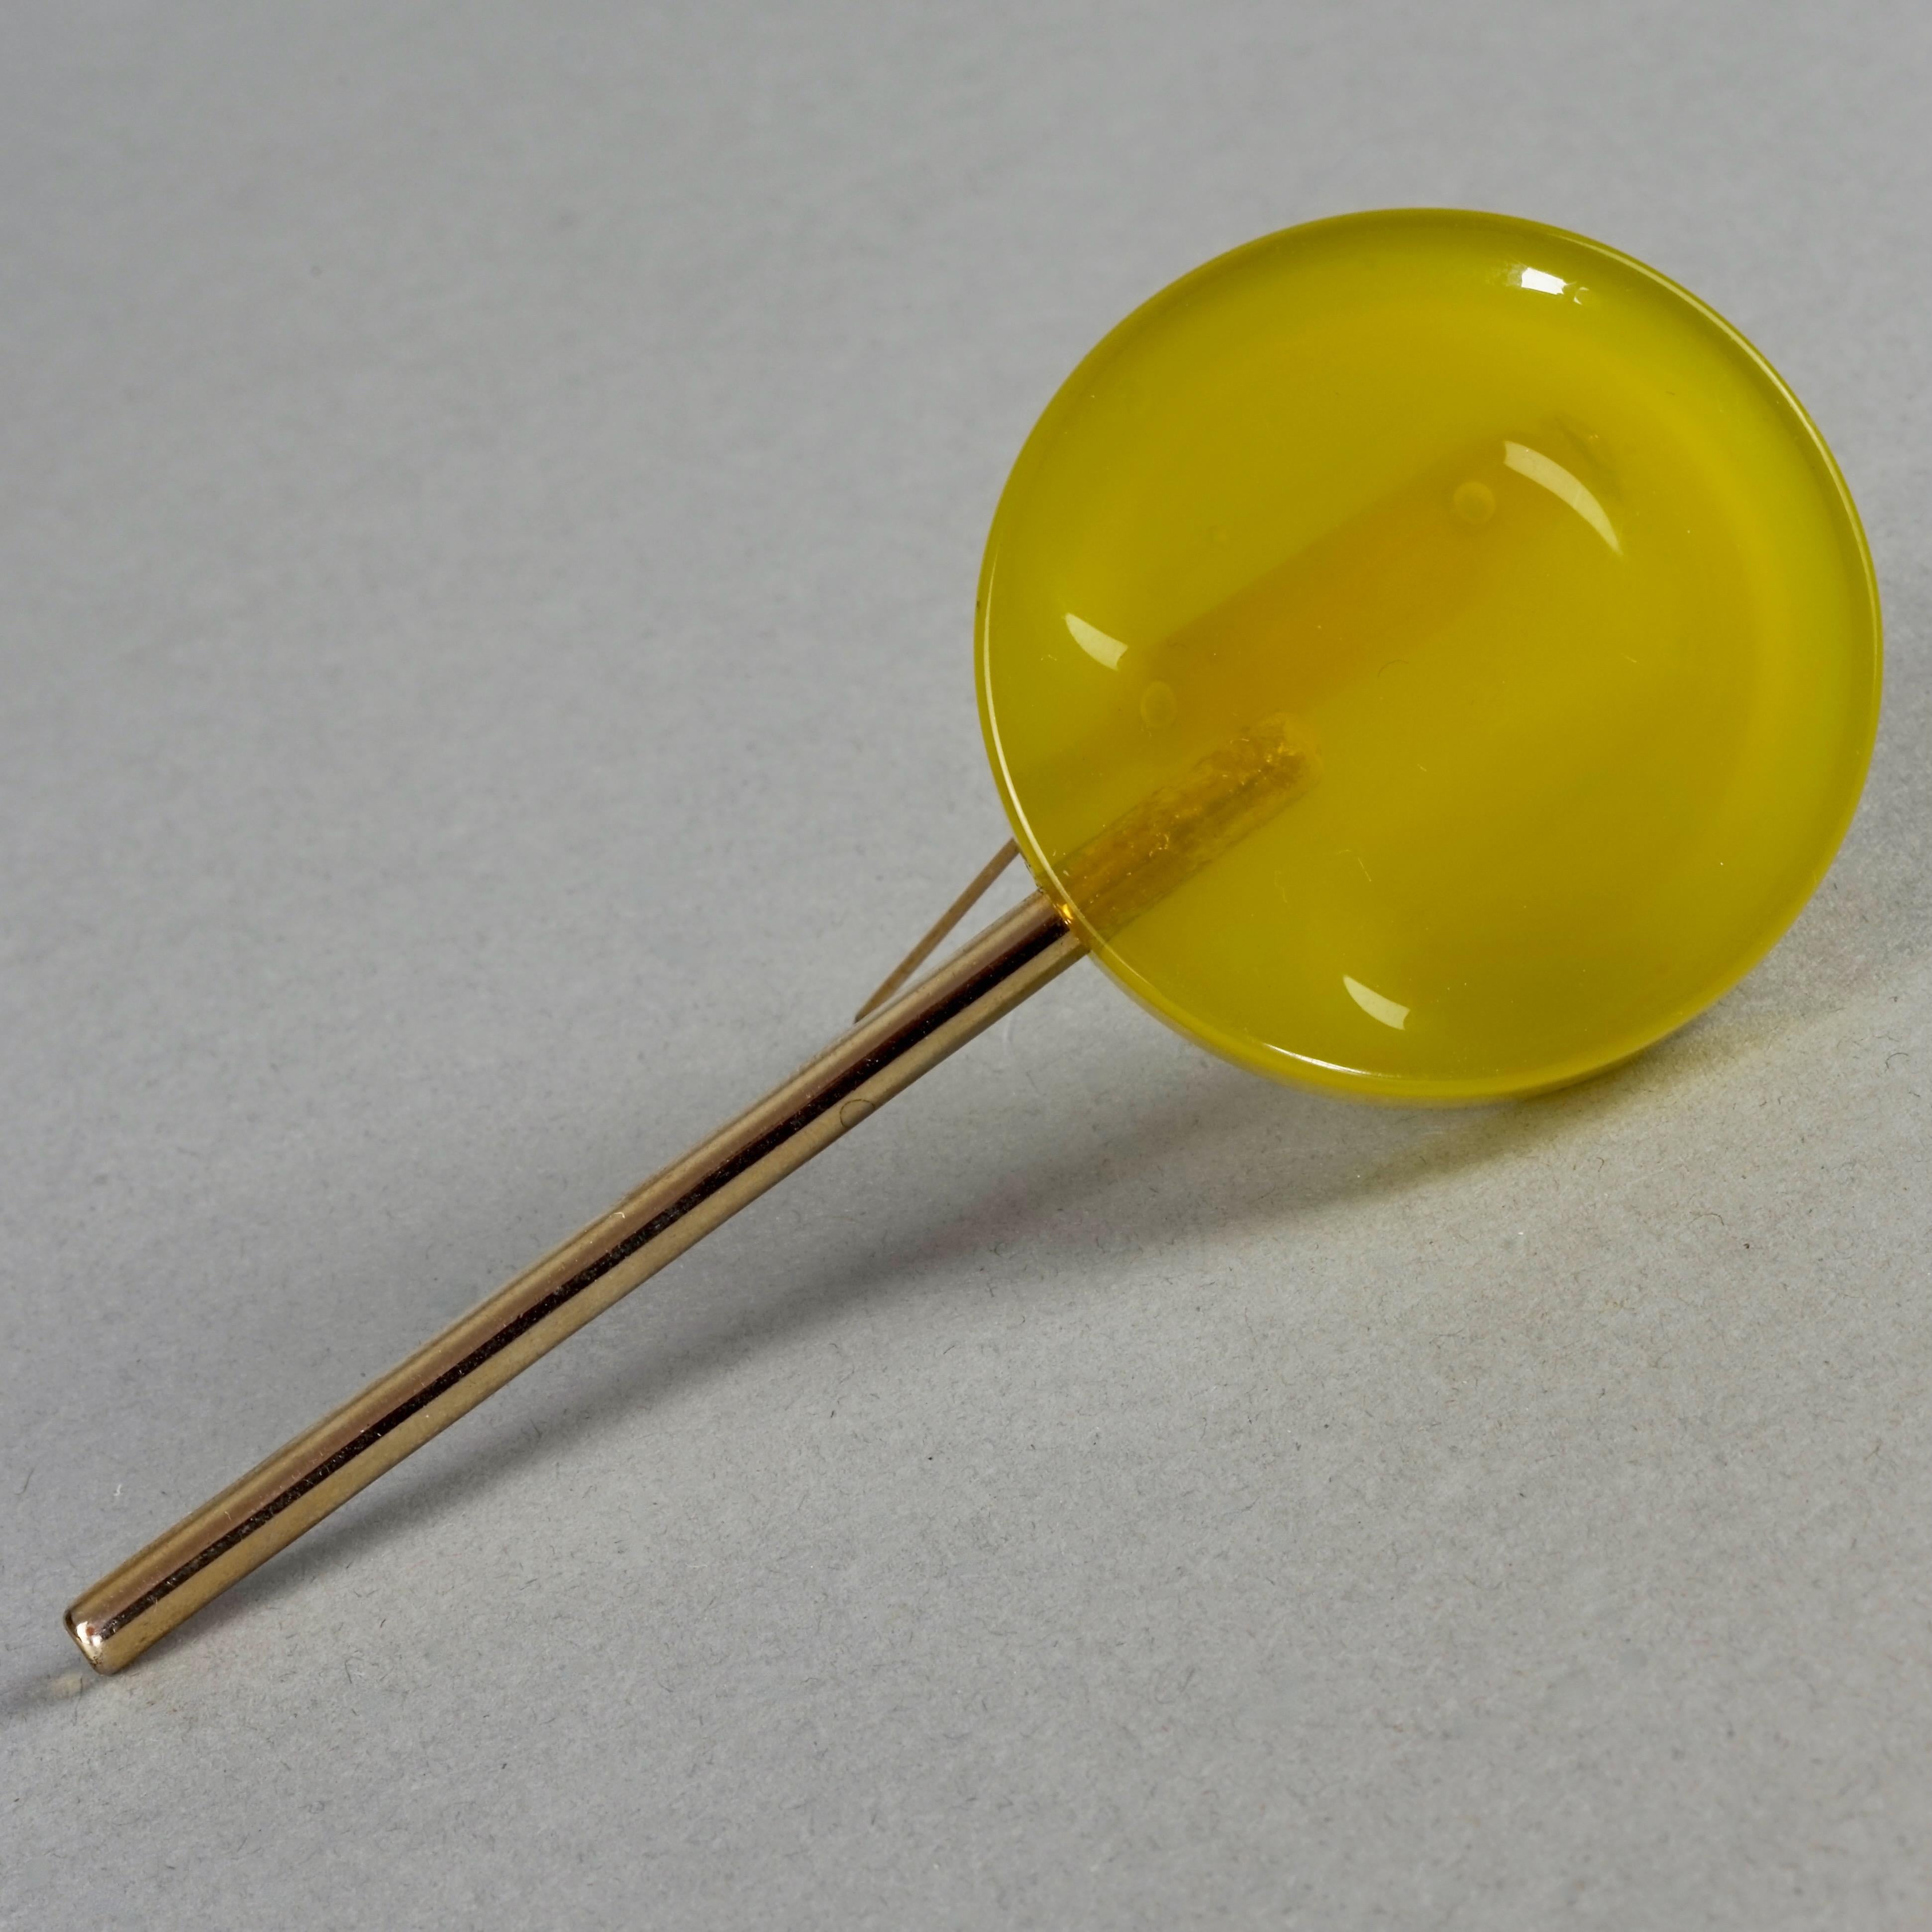 Vintage MOSCHINO Yellow Citrus Lollipop Candy Novelty Brooch For Sale 1